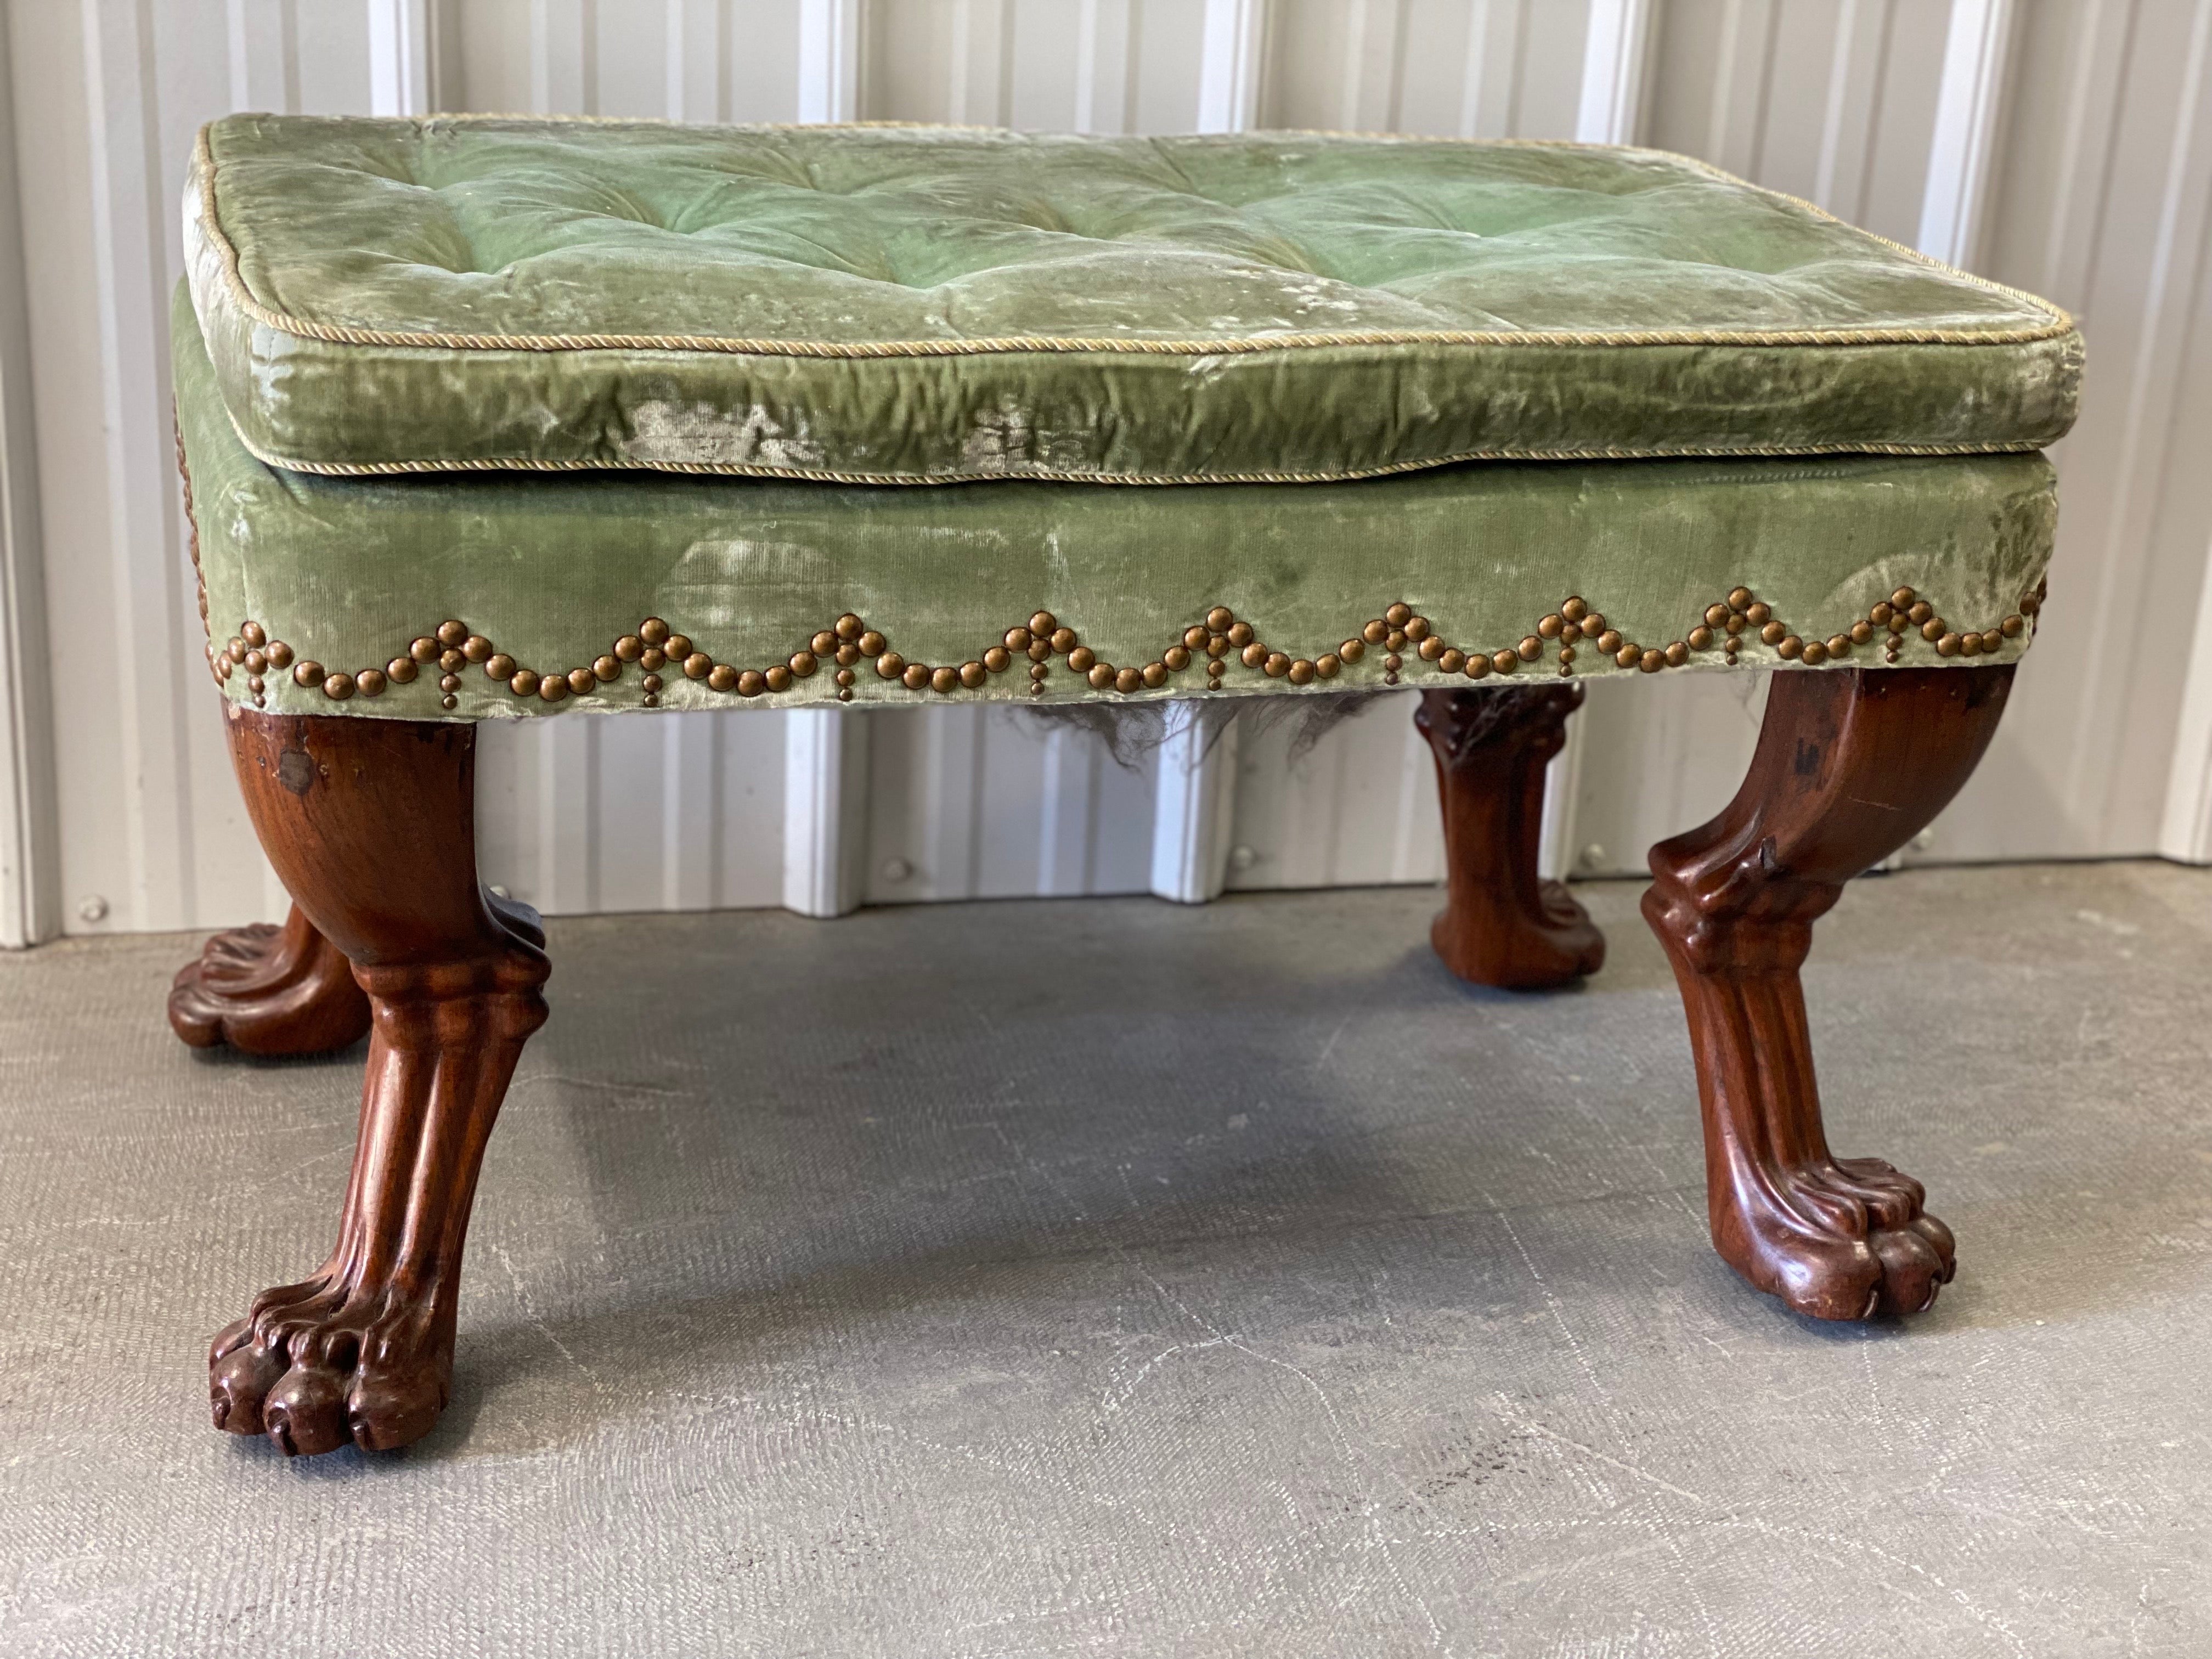 18th Century English Mahogany Clawfoot Stool in Velvet with Nailheads, Sourced by Albert Hadley.
Four excellently hand-carved mahogany legs ending in clawfoot paws with a tufted loose cushion upholstered in a celadon green velvet fabric with a